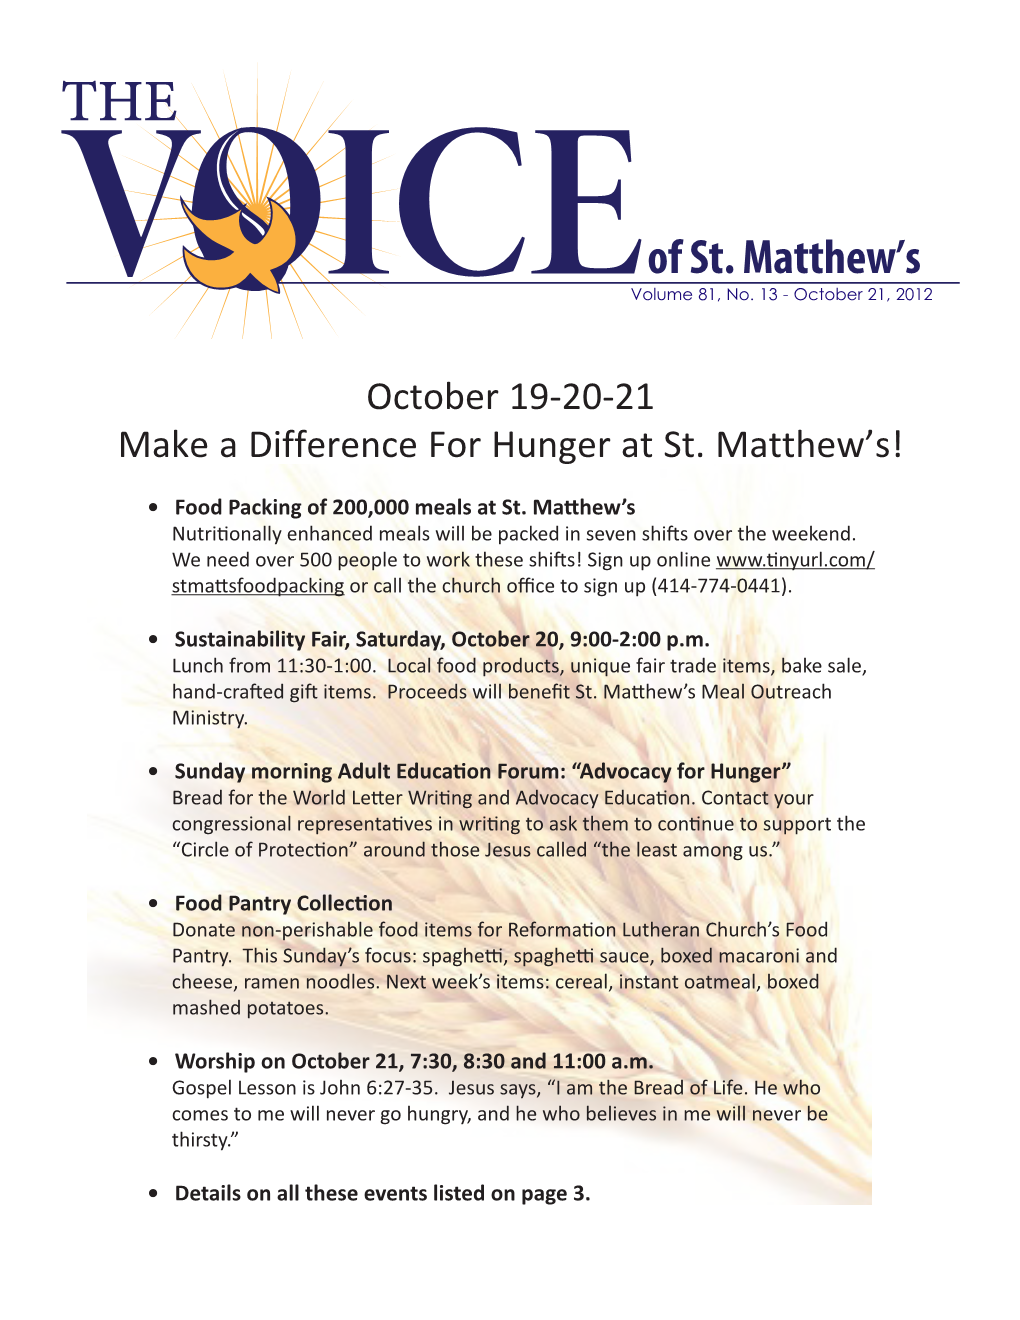 October 19-20-21 Make a Difference for Hunger at St. Matthew's!